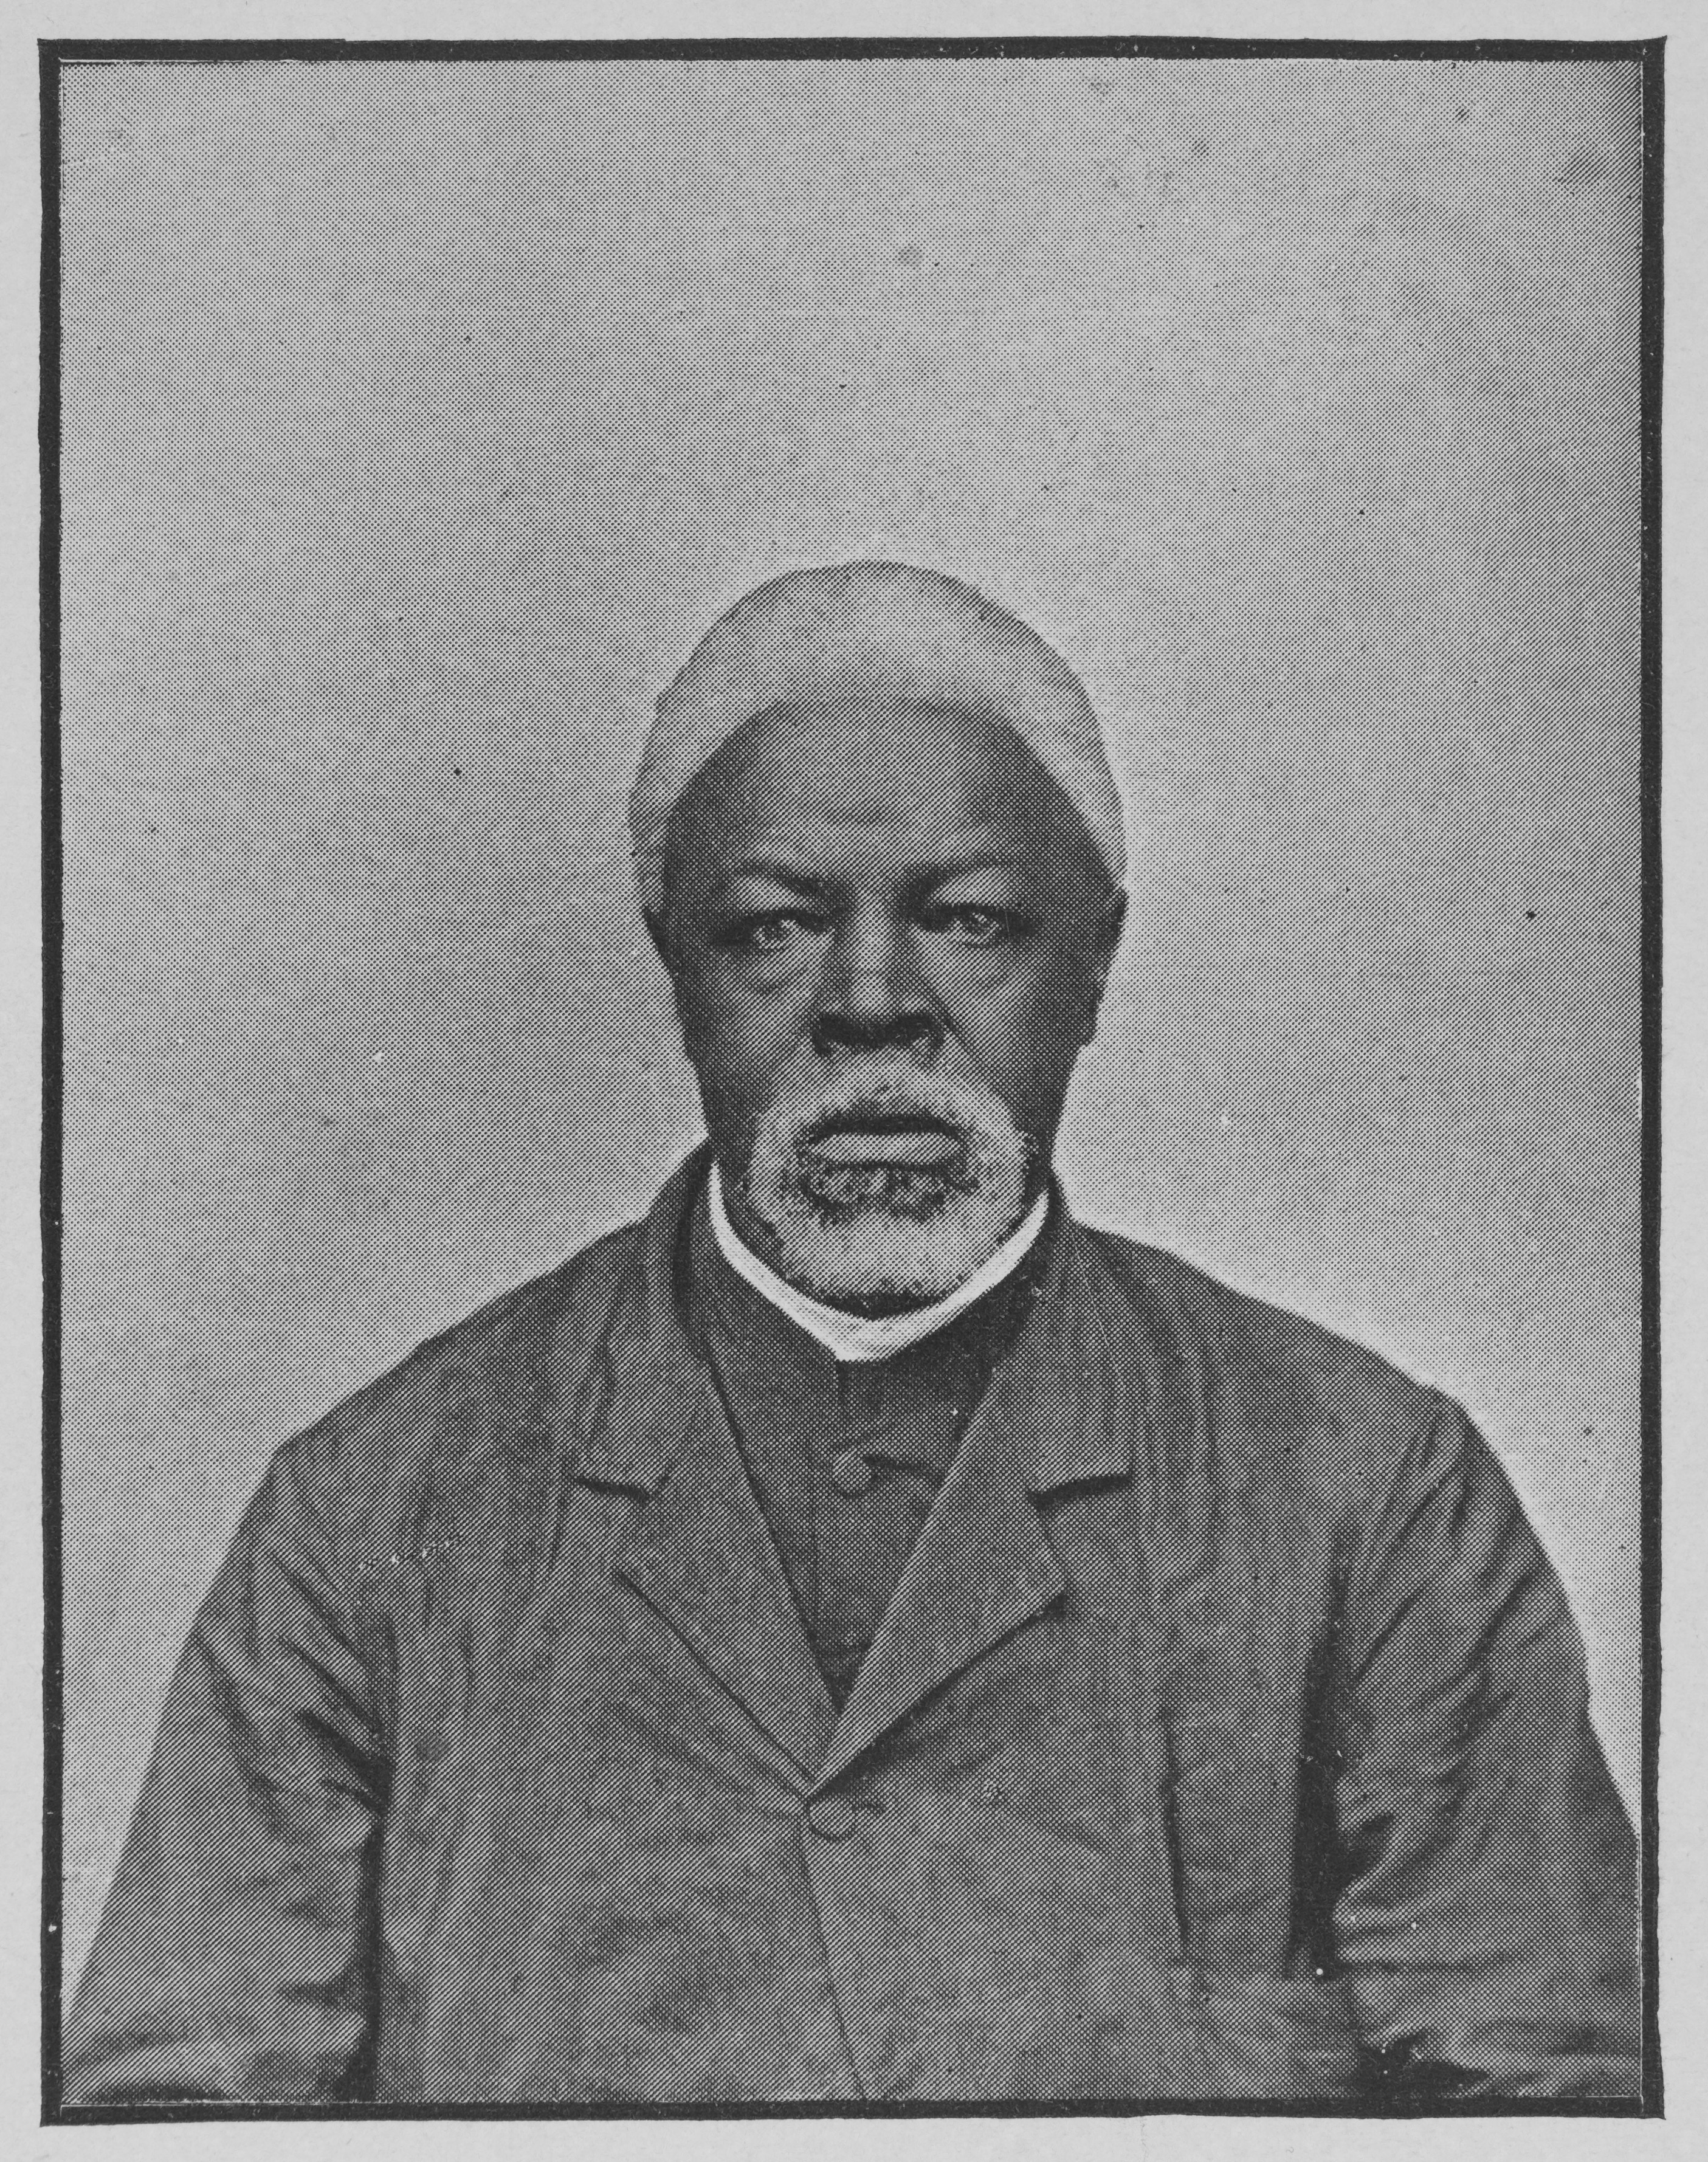 Black-and-white portrait of a Black man with white hair.